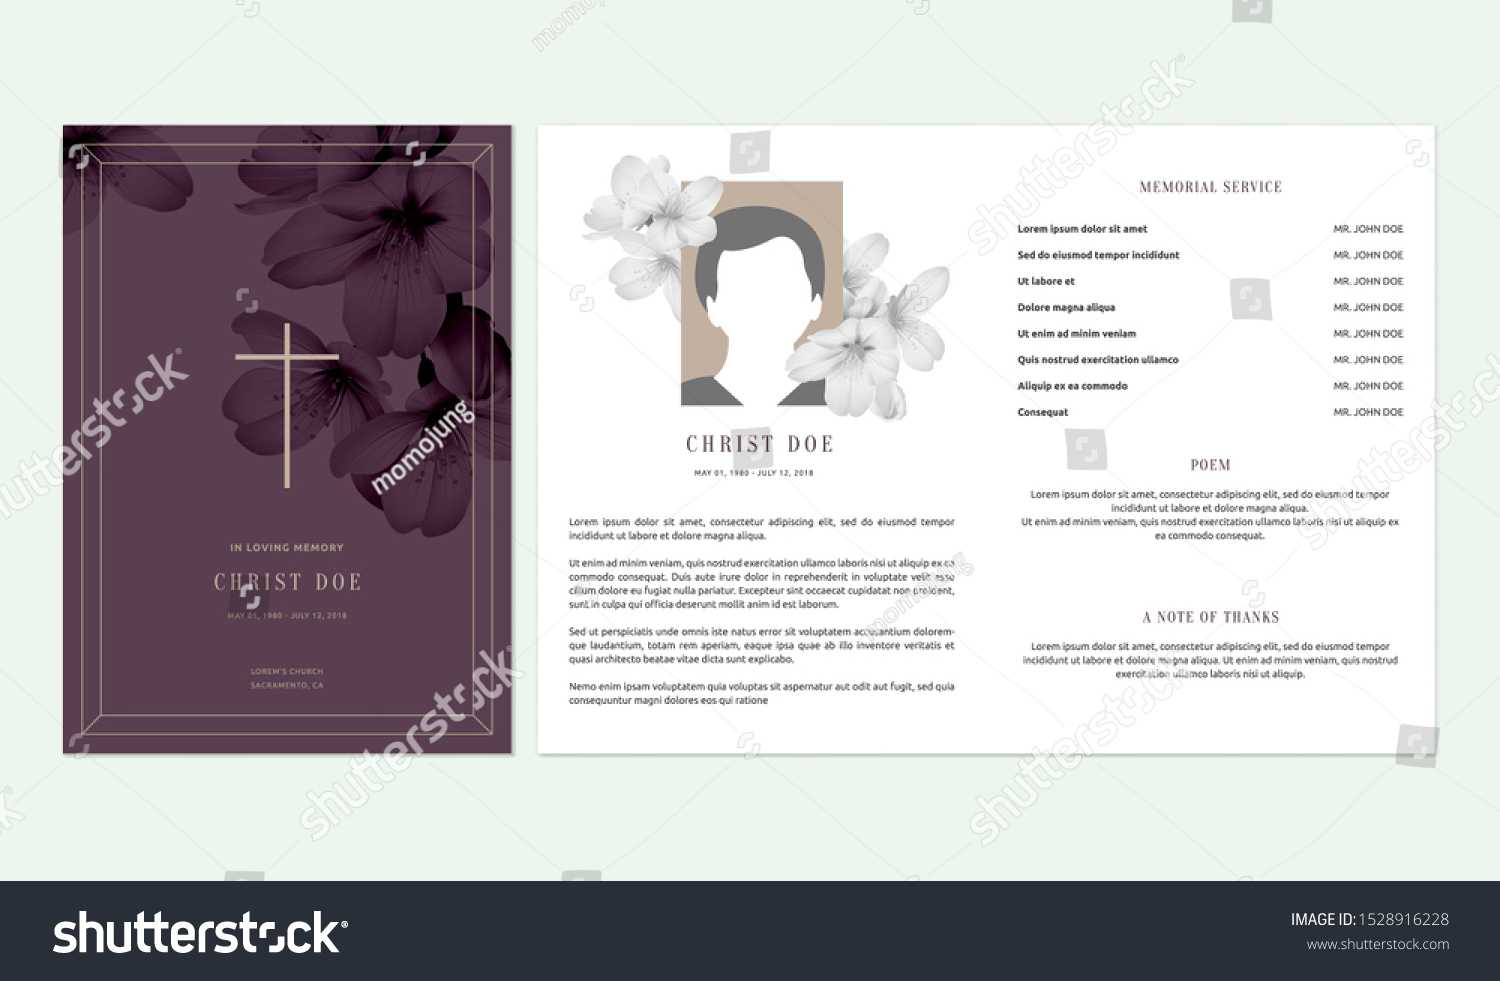 Floral Memorial Funeral Invitation Card Template | Royalty Inside Memorial Cards For Funeral Template Free